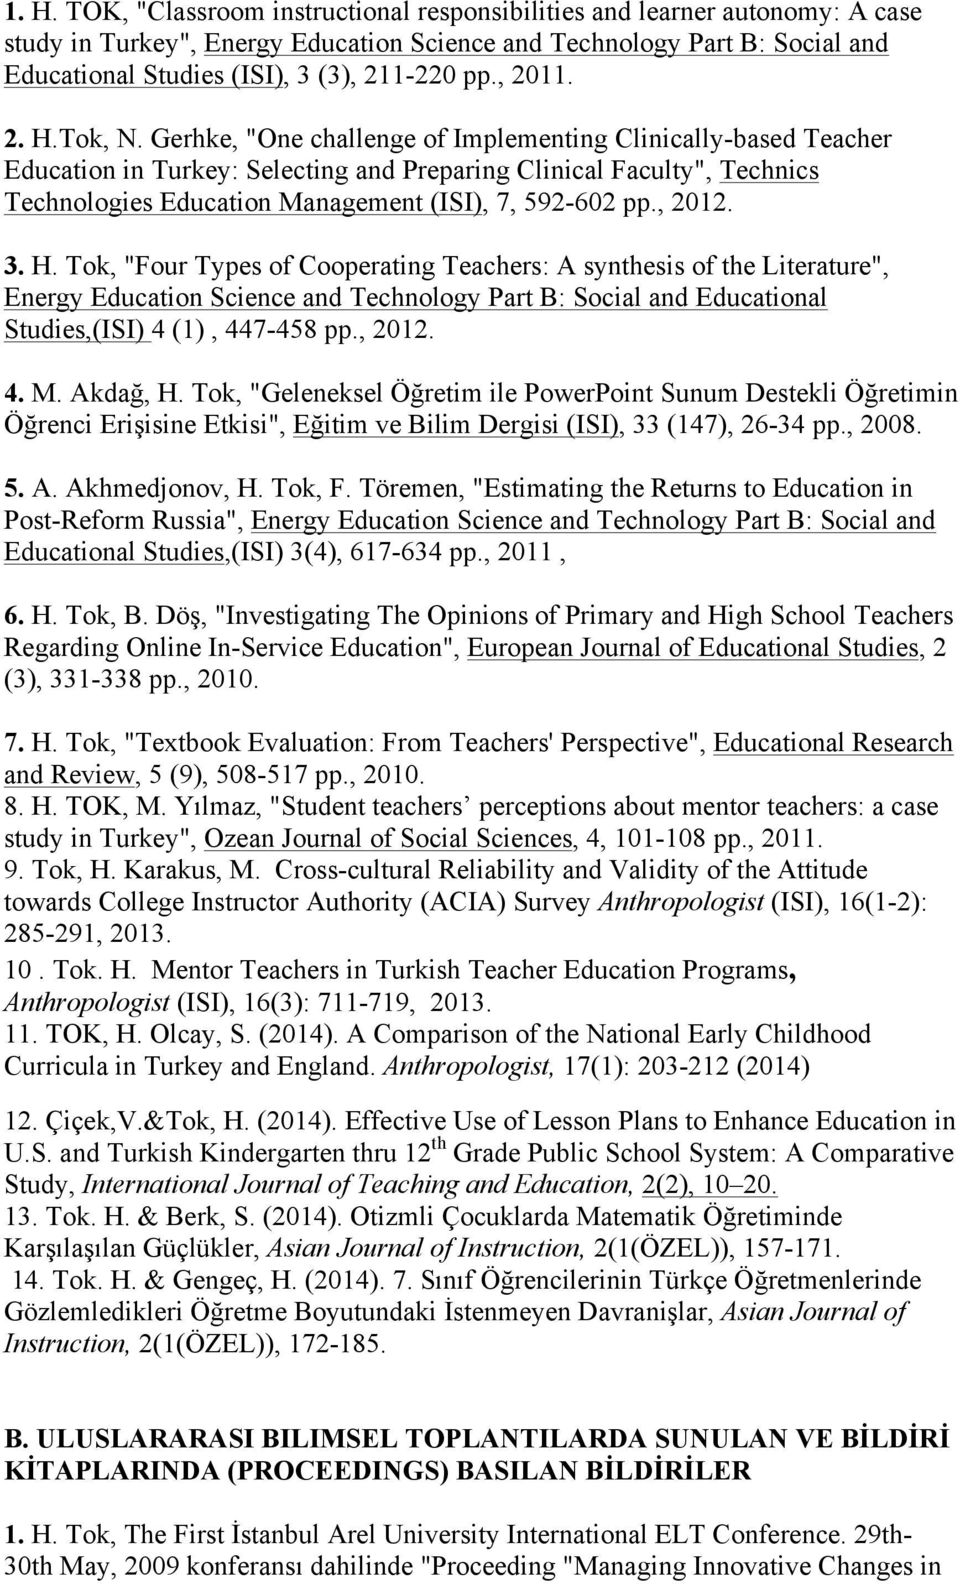 Gerhke, "One challenge of Implementing Clinically-based Teacher Education in Turkey: Selecting and Preparing Clinical Faculty", Technics Technologies Education Management (ISI), 7, 592-602 pp., 2012.